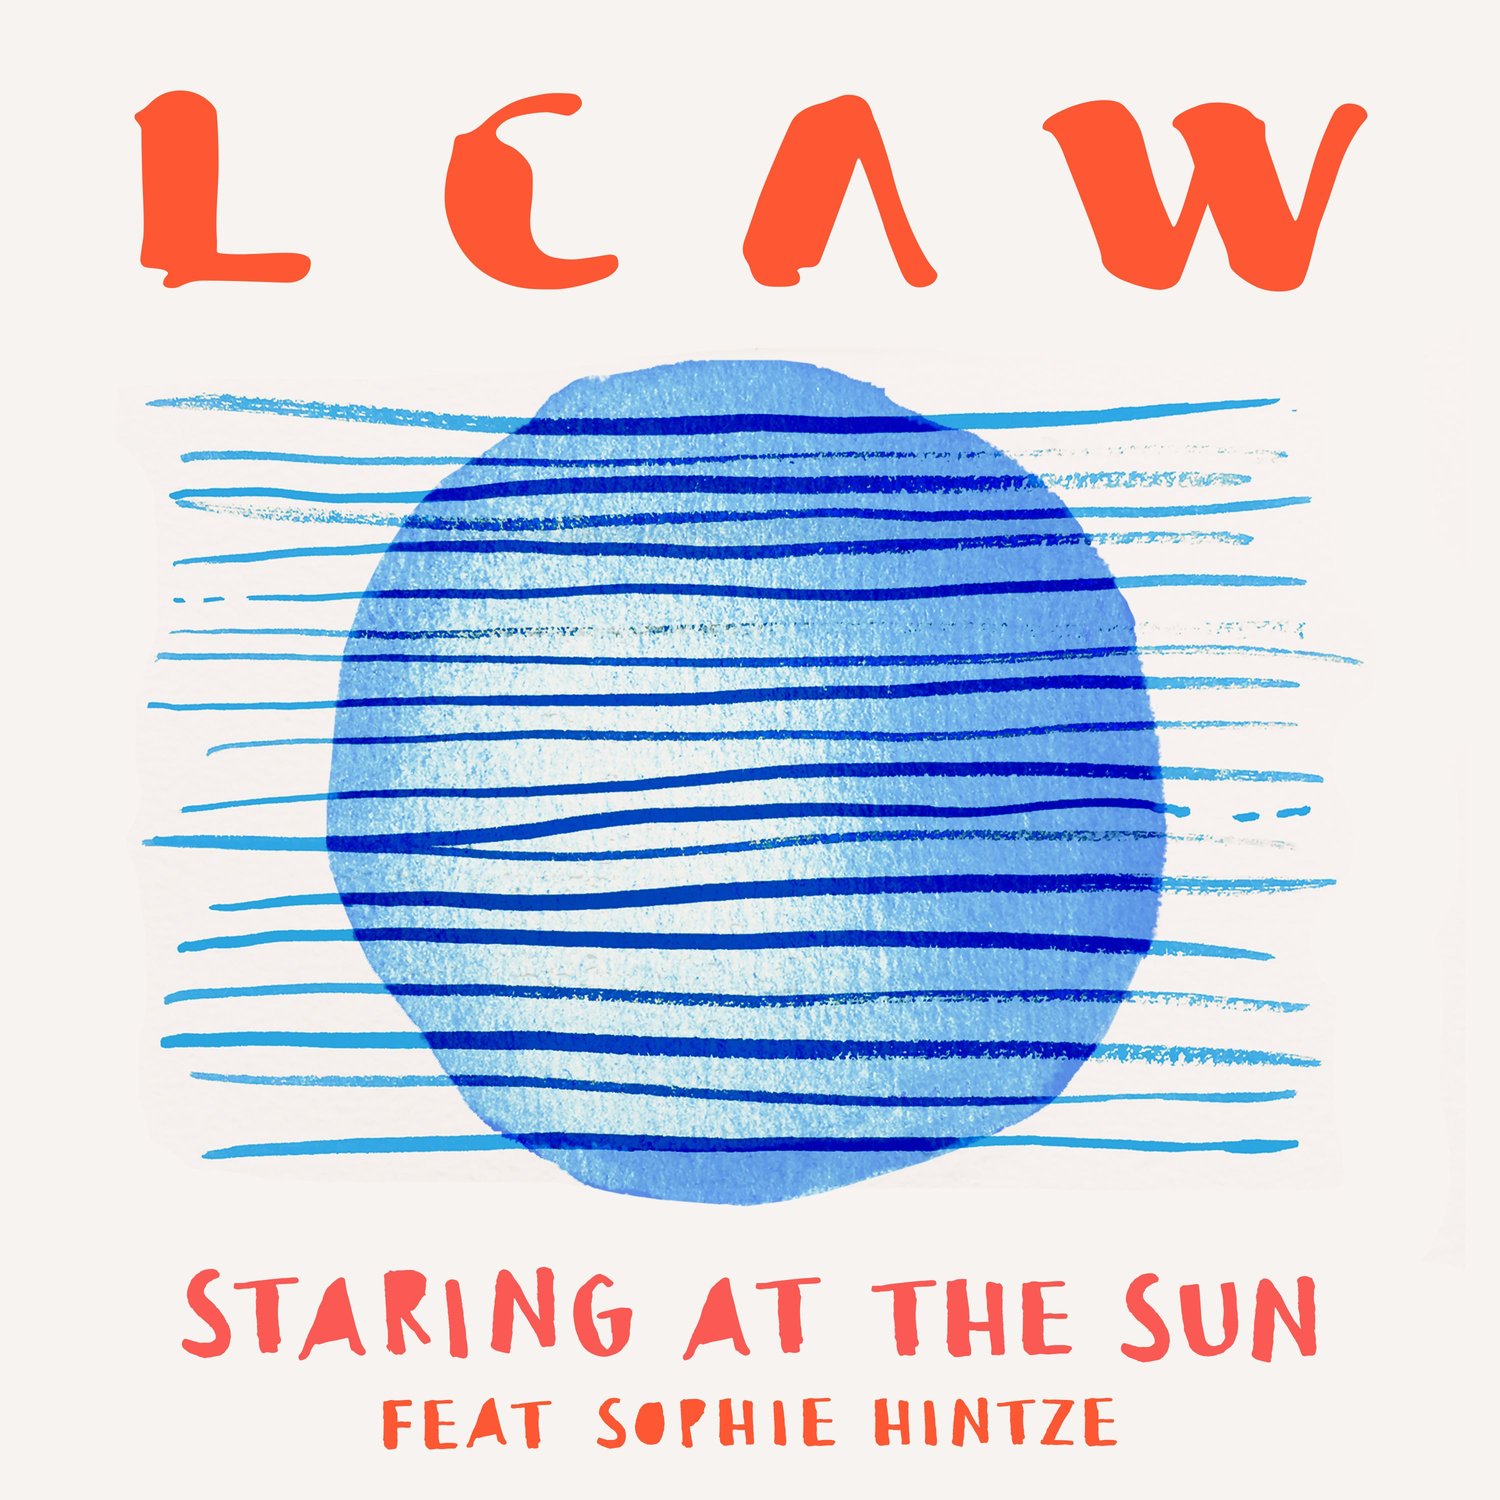 Staring at the Sun. LCAW. Saint Lane staring at the Sun. Солнце feat